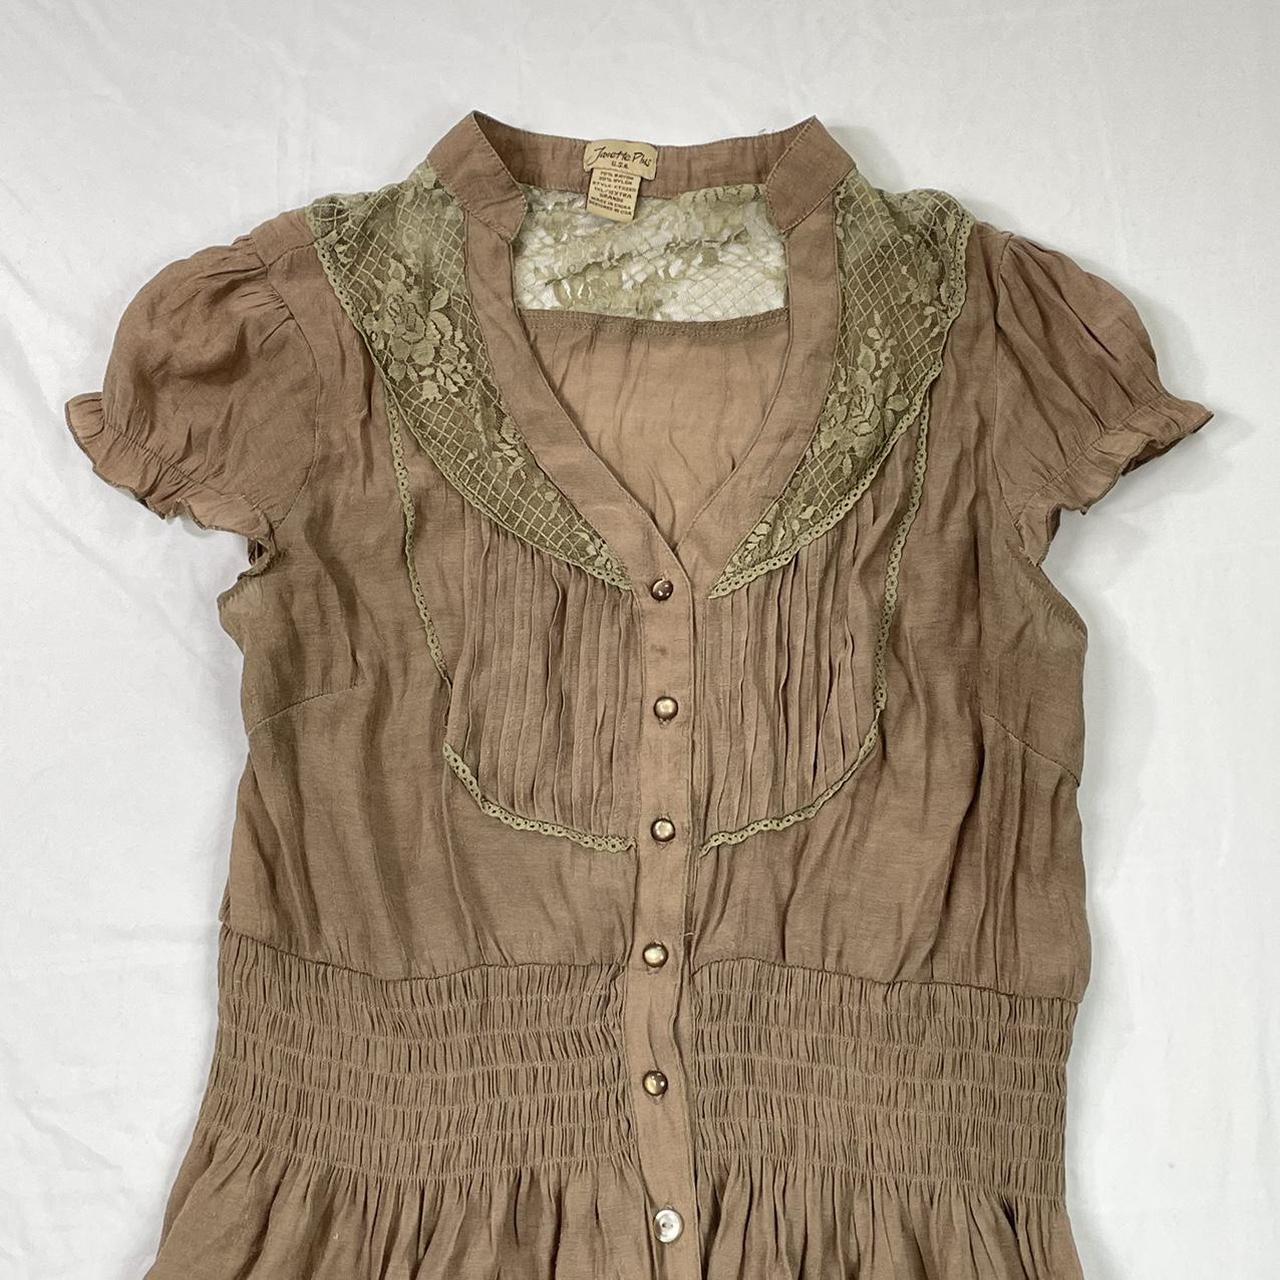 Product Image 2 - brown fairy top 

#fairy #cottagecore